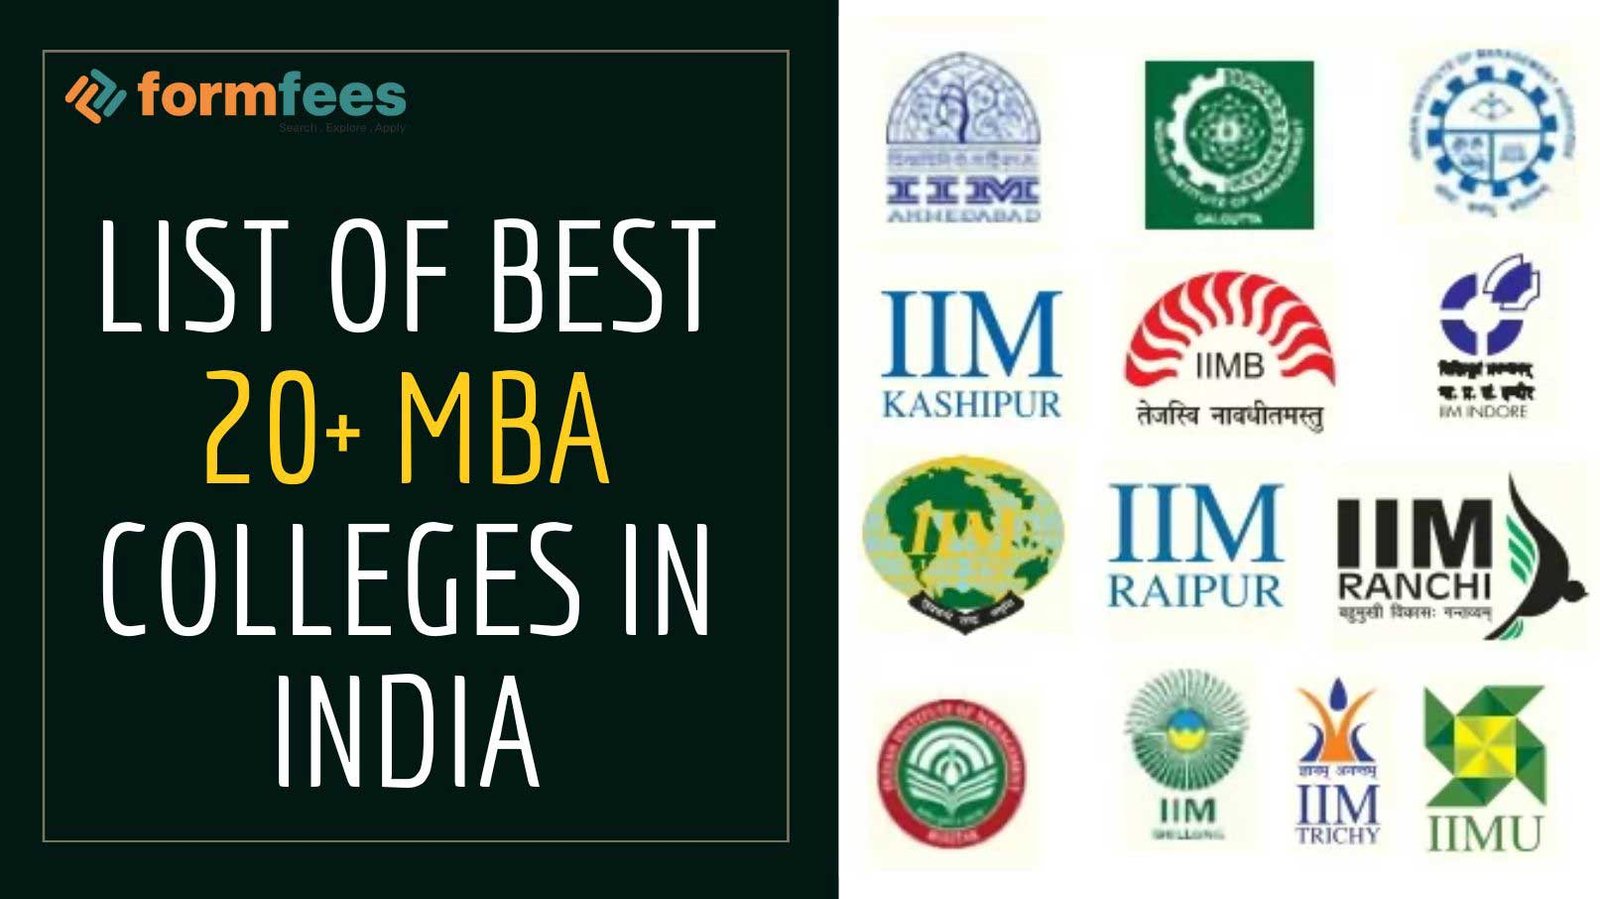 List of Best 20+ MBA Colleges in India